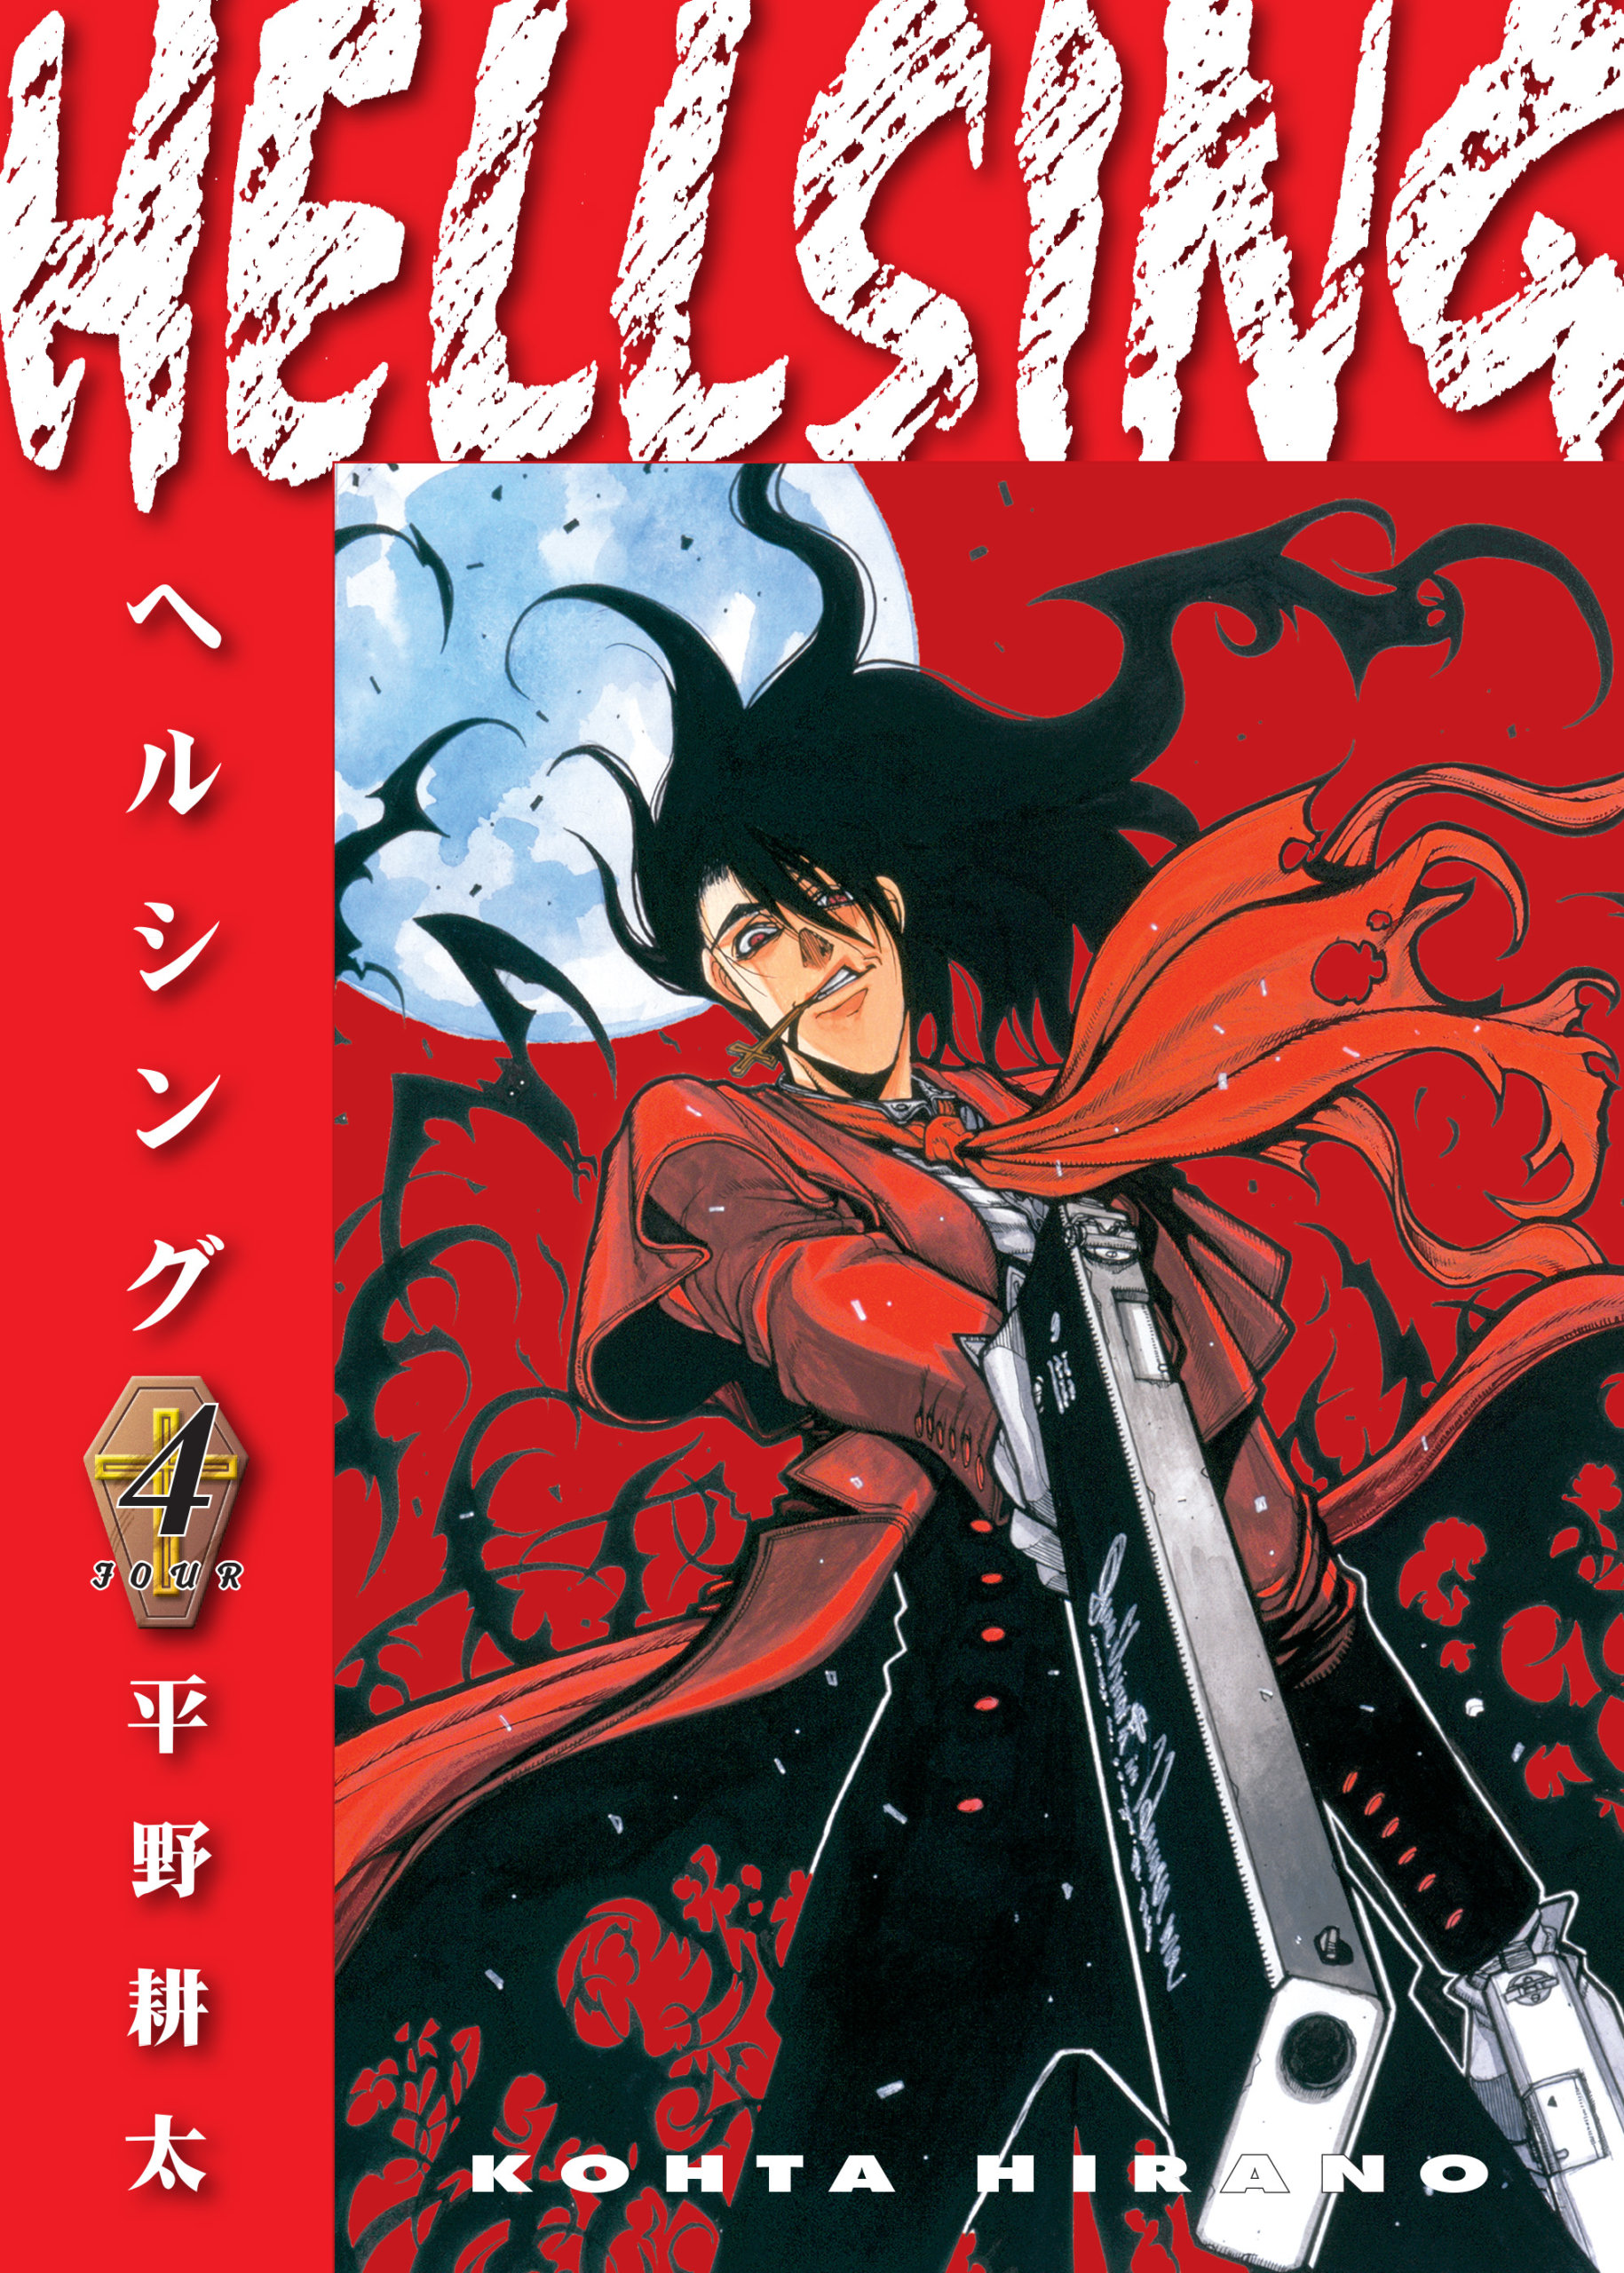 HELLSING RISES FROM THE GRAVE IN NEW EDITIONS :: Blog :: Dark Horse Comics